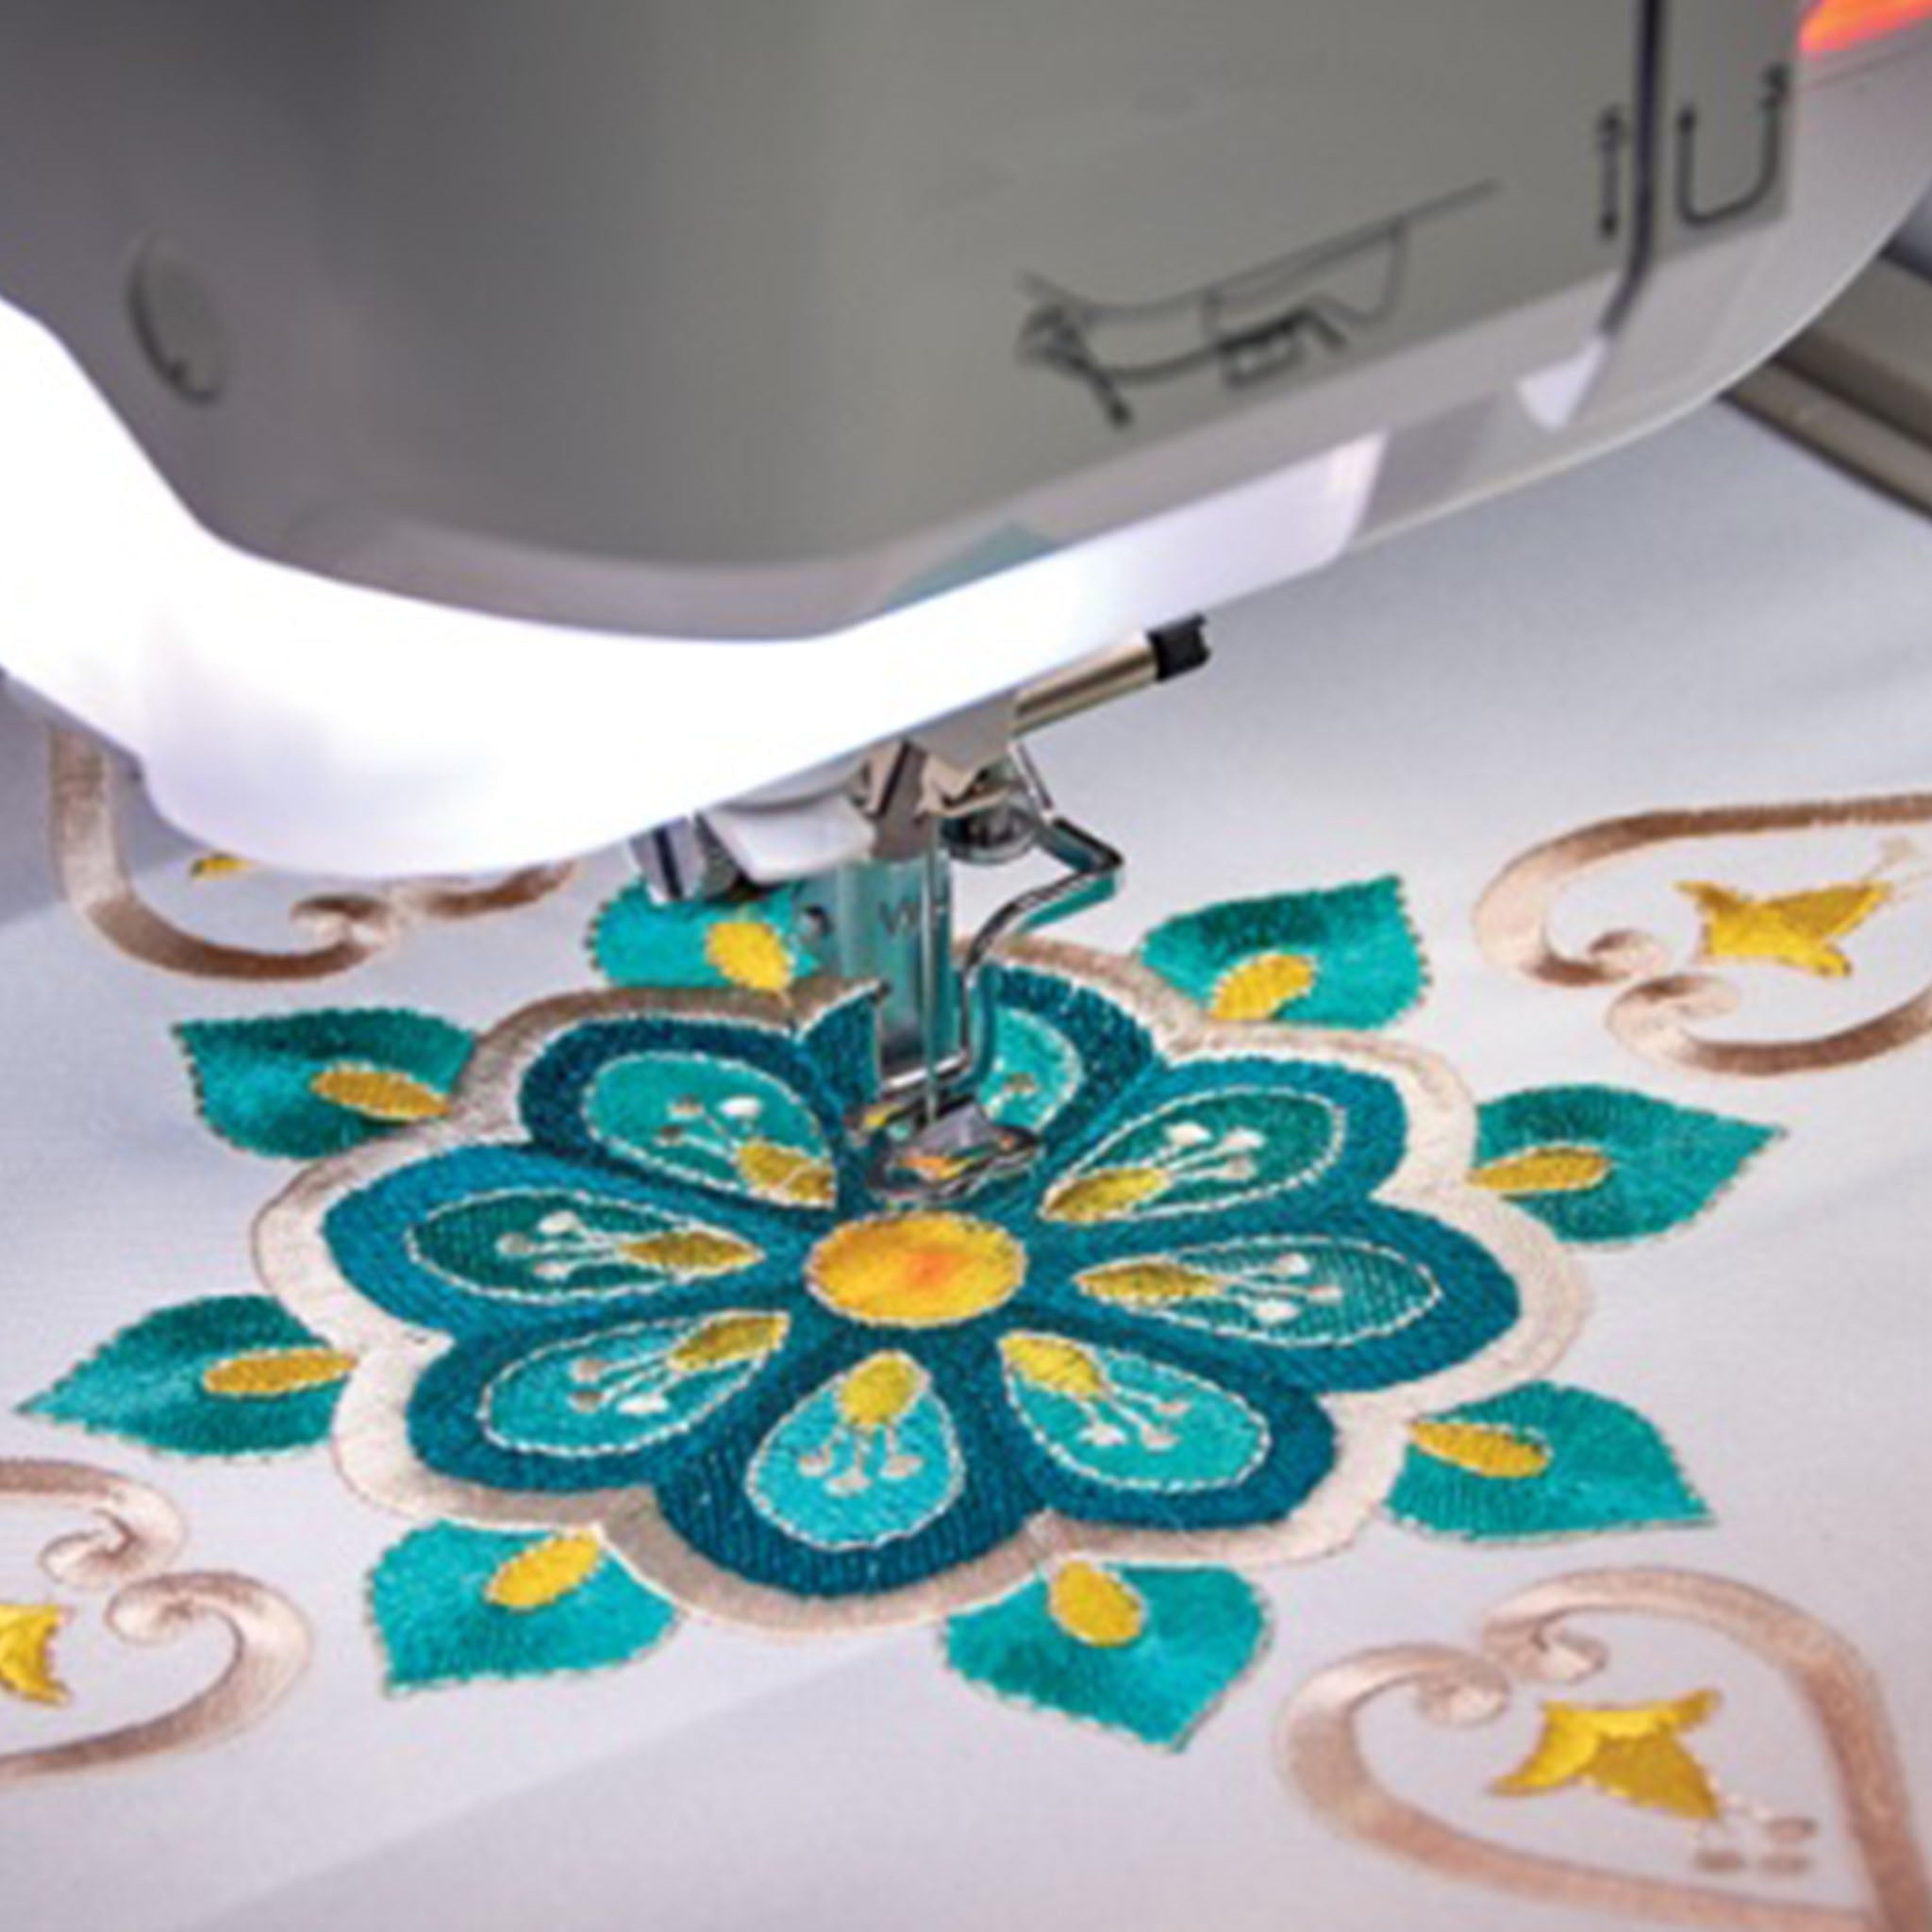 Used Baby Lock Meridian 2 Embroidery Machine - Recertified